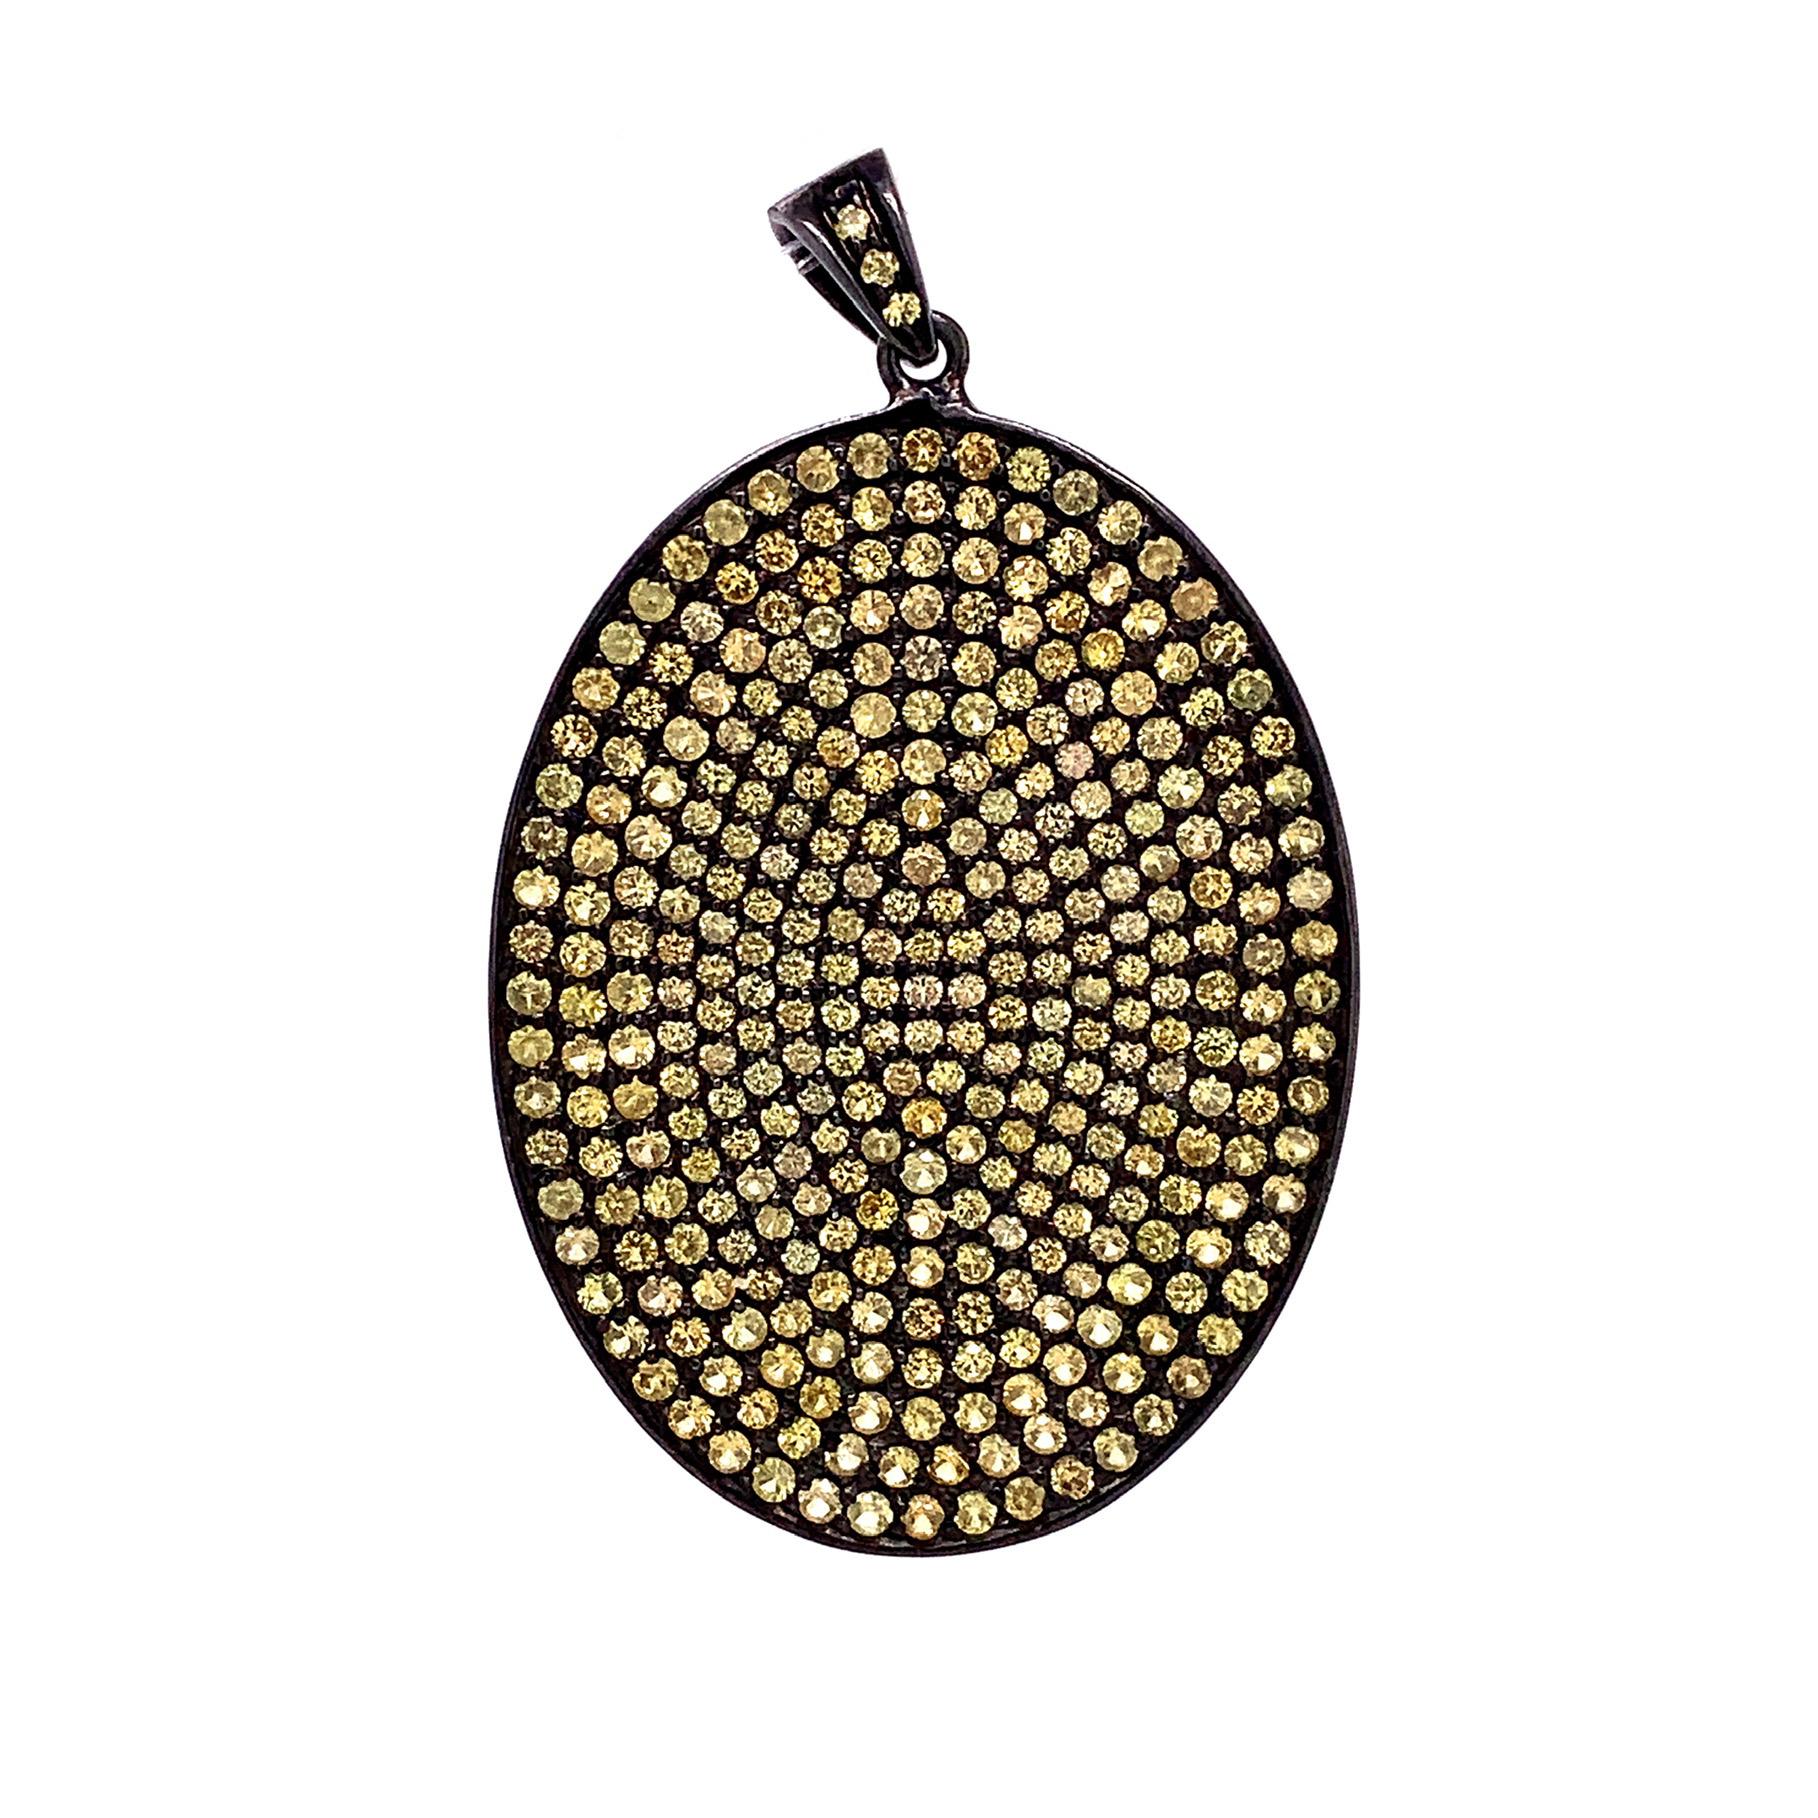 Life in color Collection

Yellow Sapphire oval shape disc pendant set in blackened sterling silver.

Yellow Sapphire: 5.45 ct total weight.